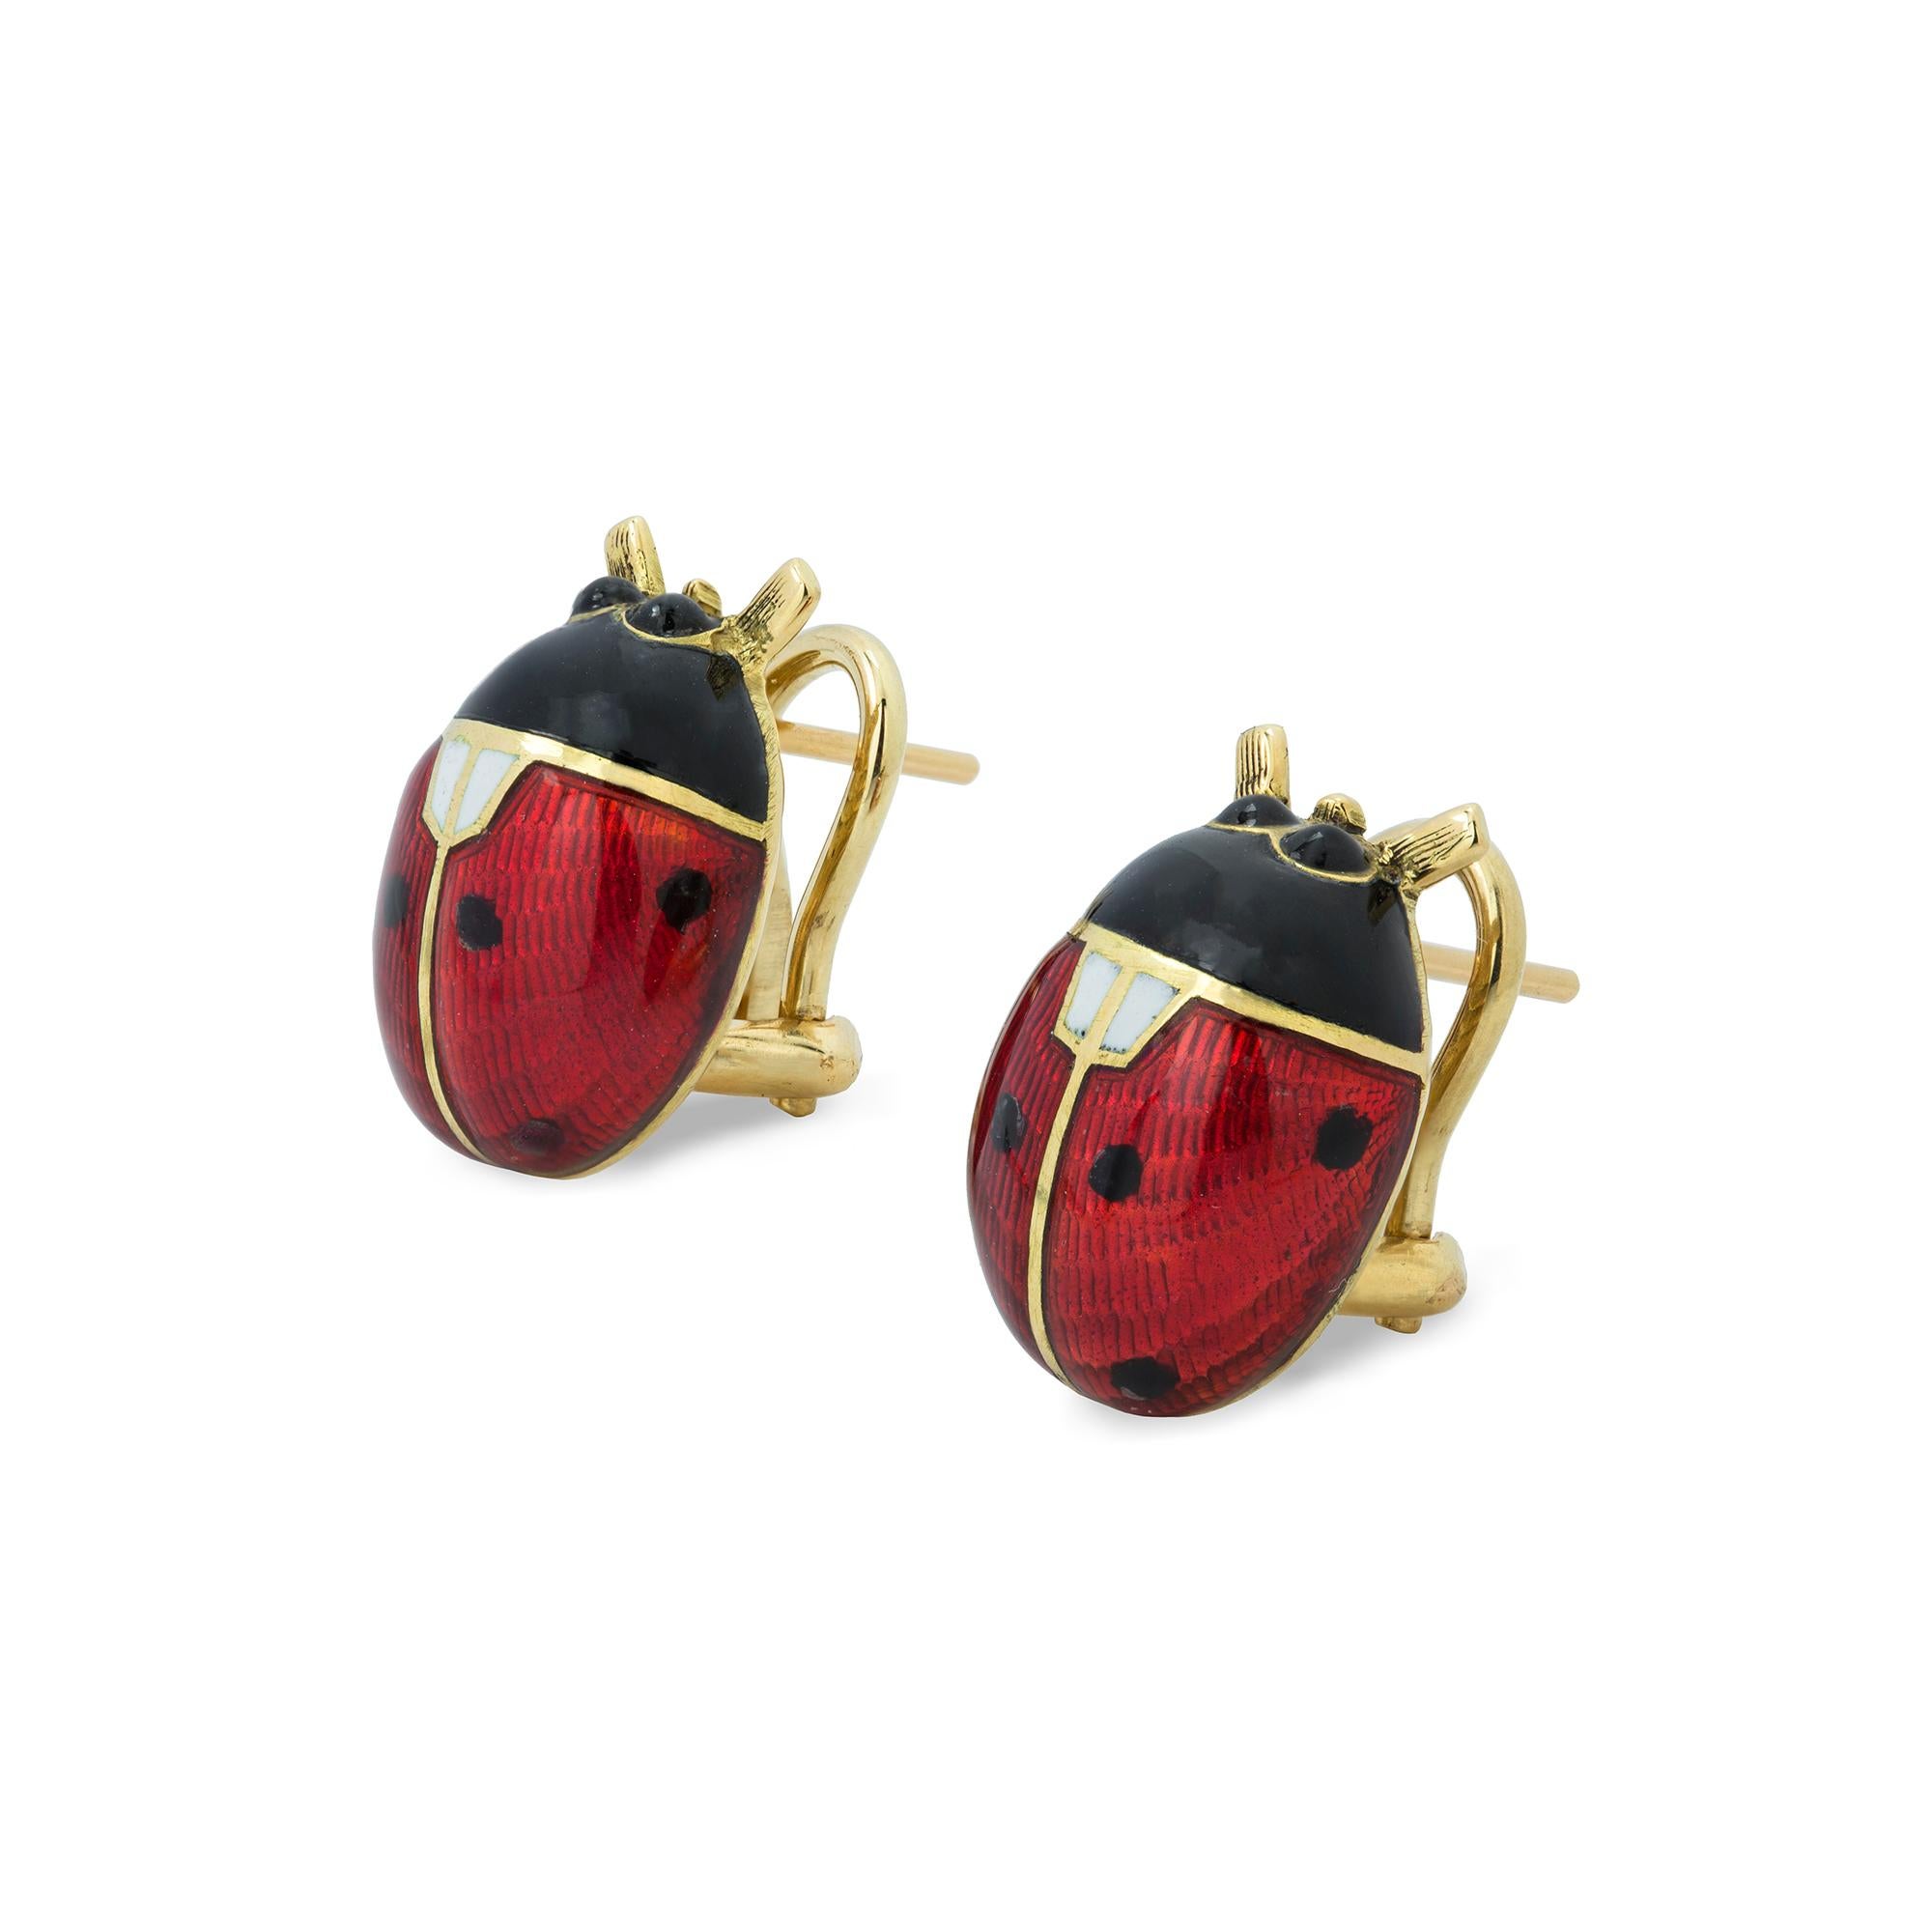 A pair of guilloche enamel ladybird earrings, the red, black and white enamelled body of each ladybird, to a yellow gold mount with post and clip fittings, hallmarked 18ct gold, London, 2018, made by Bentley & Skinner, gross weight 14.3 grams.

This